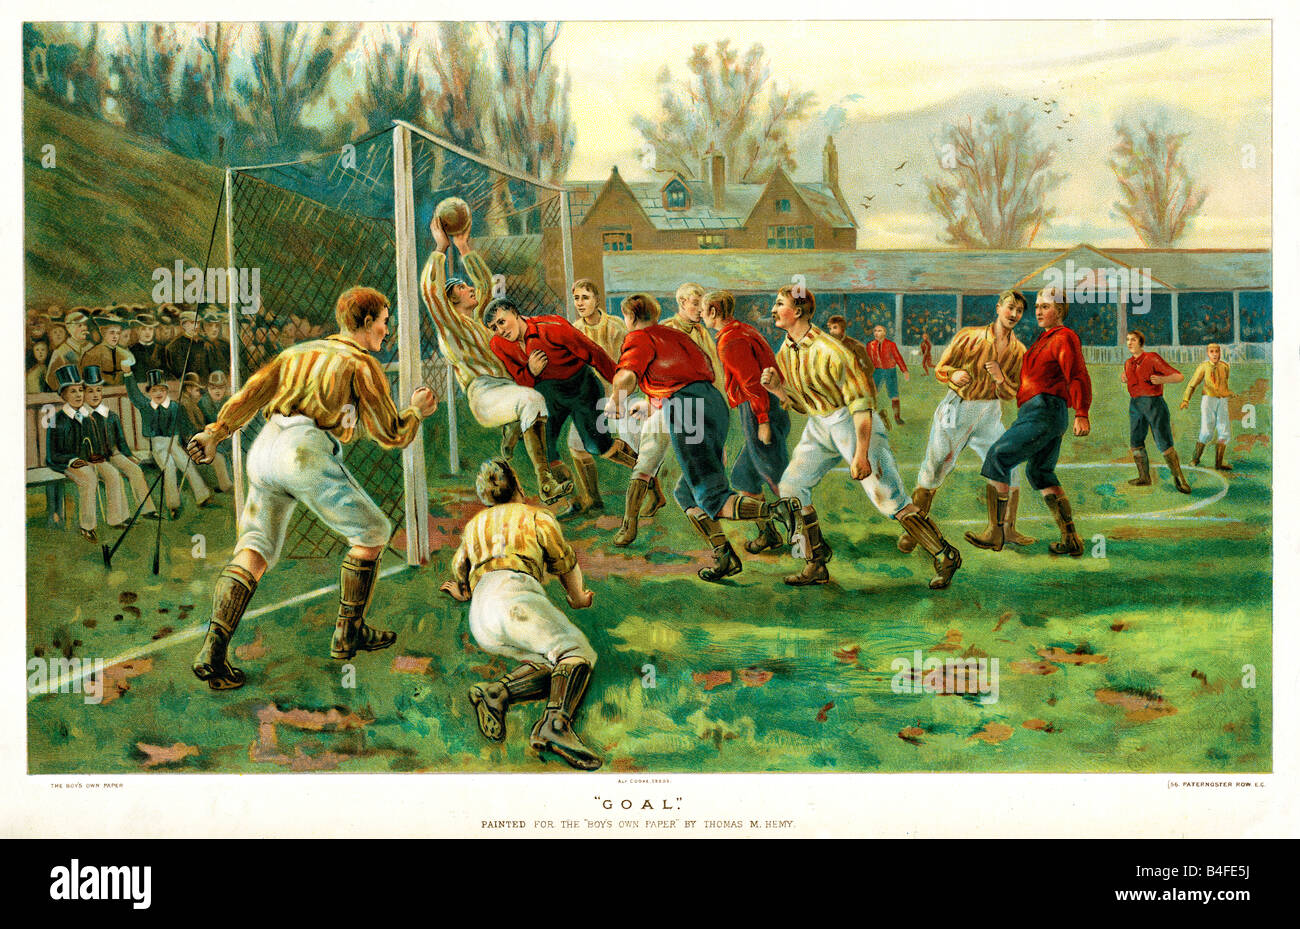 Goal 1882 print by Thomas Hemy of goalscoring in a Victorian football match with a crowd of schoolboys cheering on the play Stock Photo